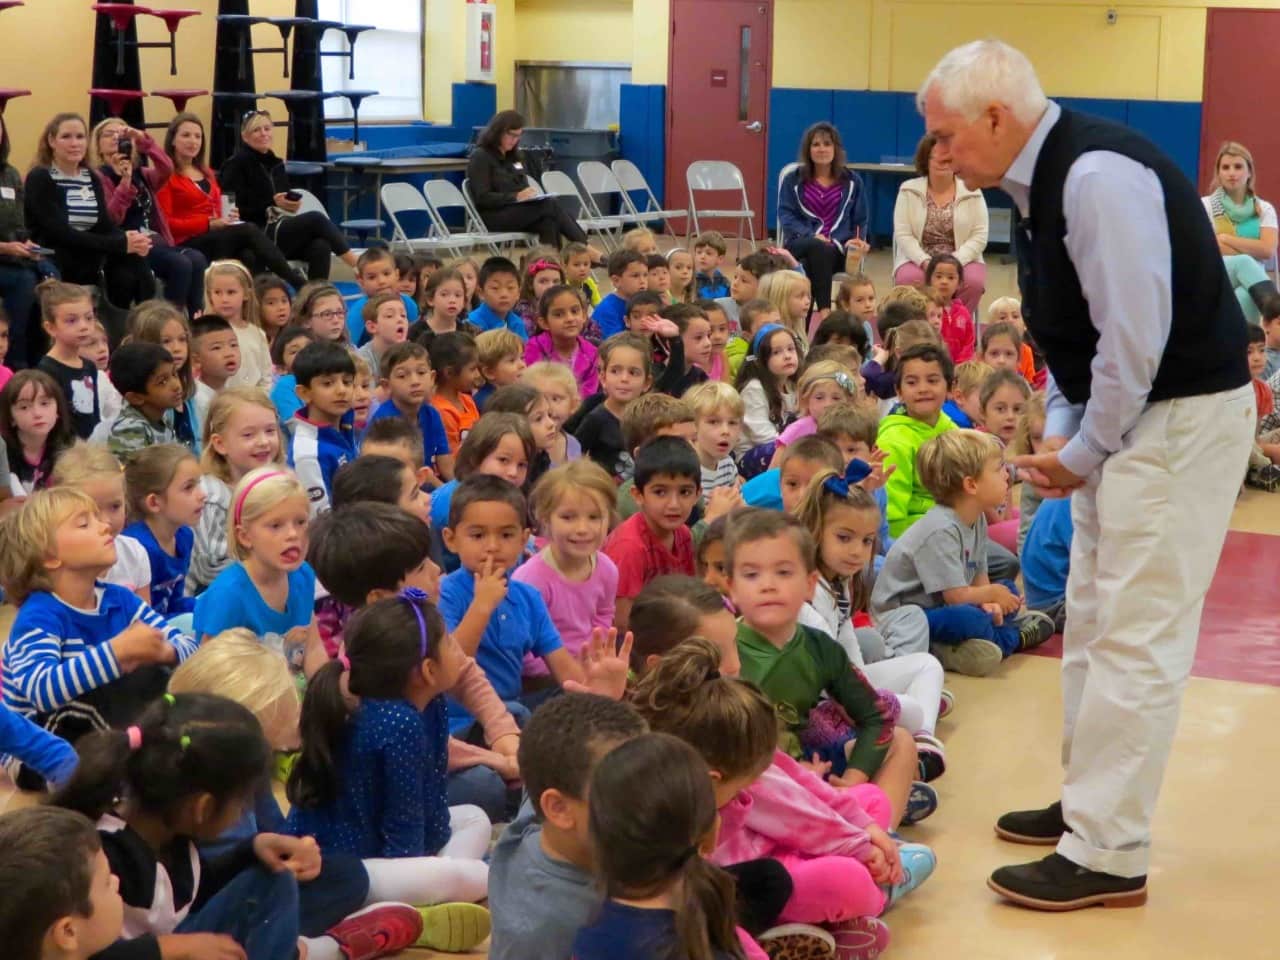 Briarcliff Manor’s Todd Elementary School welcomed acclaimed children’s book author Marc Brown, best known for his series about an aardvark named Arthur, as part of the PTA’s annual author visits series.
